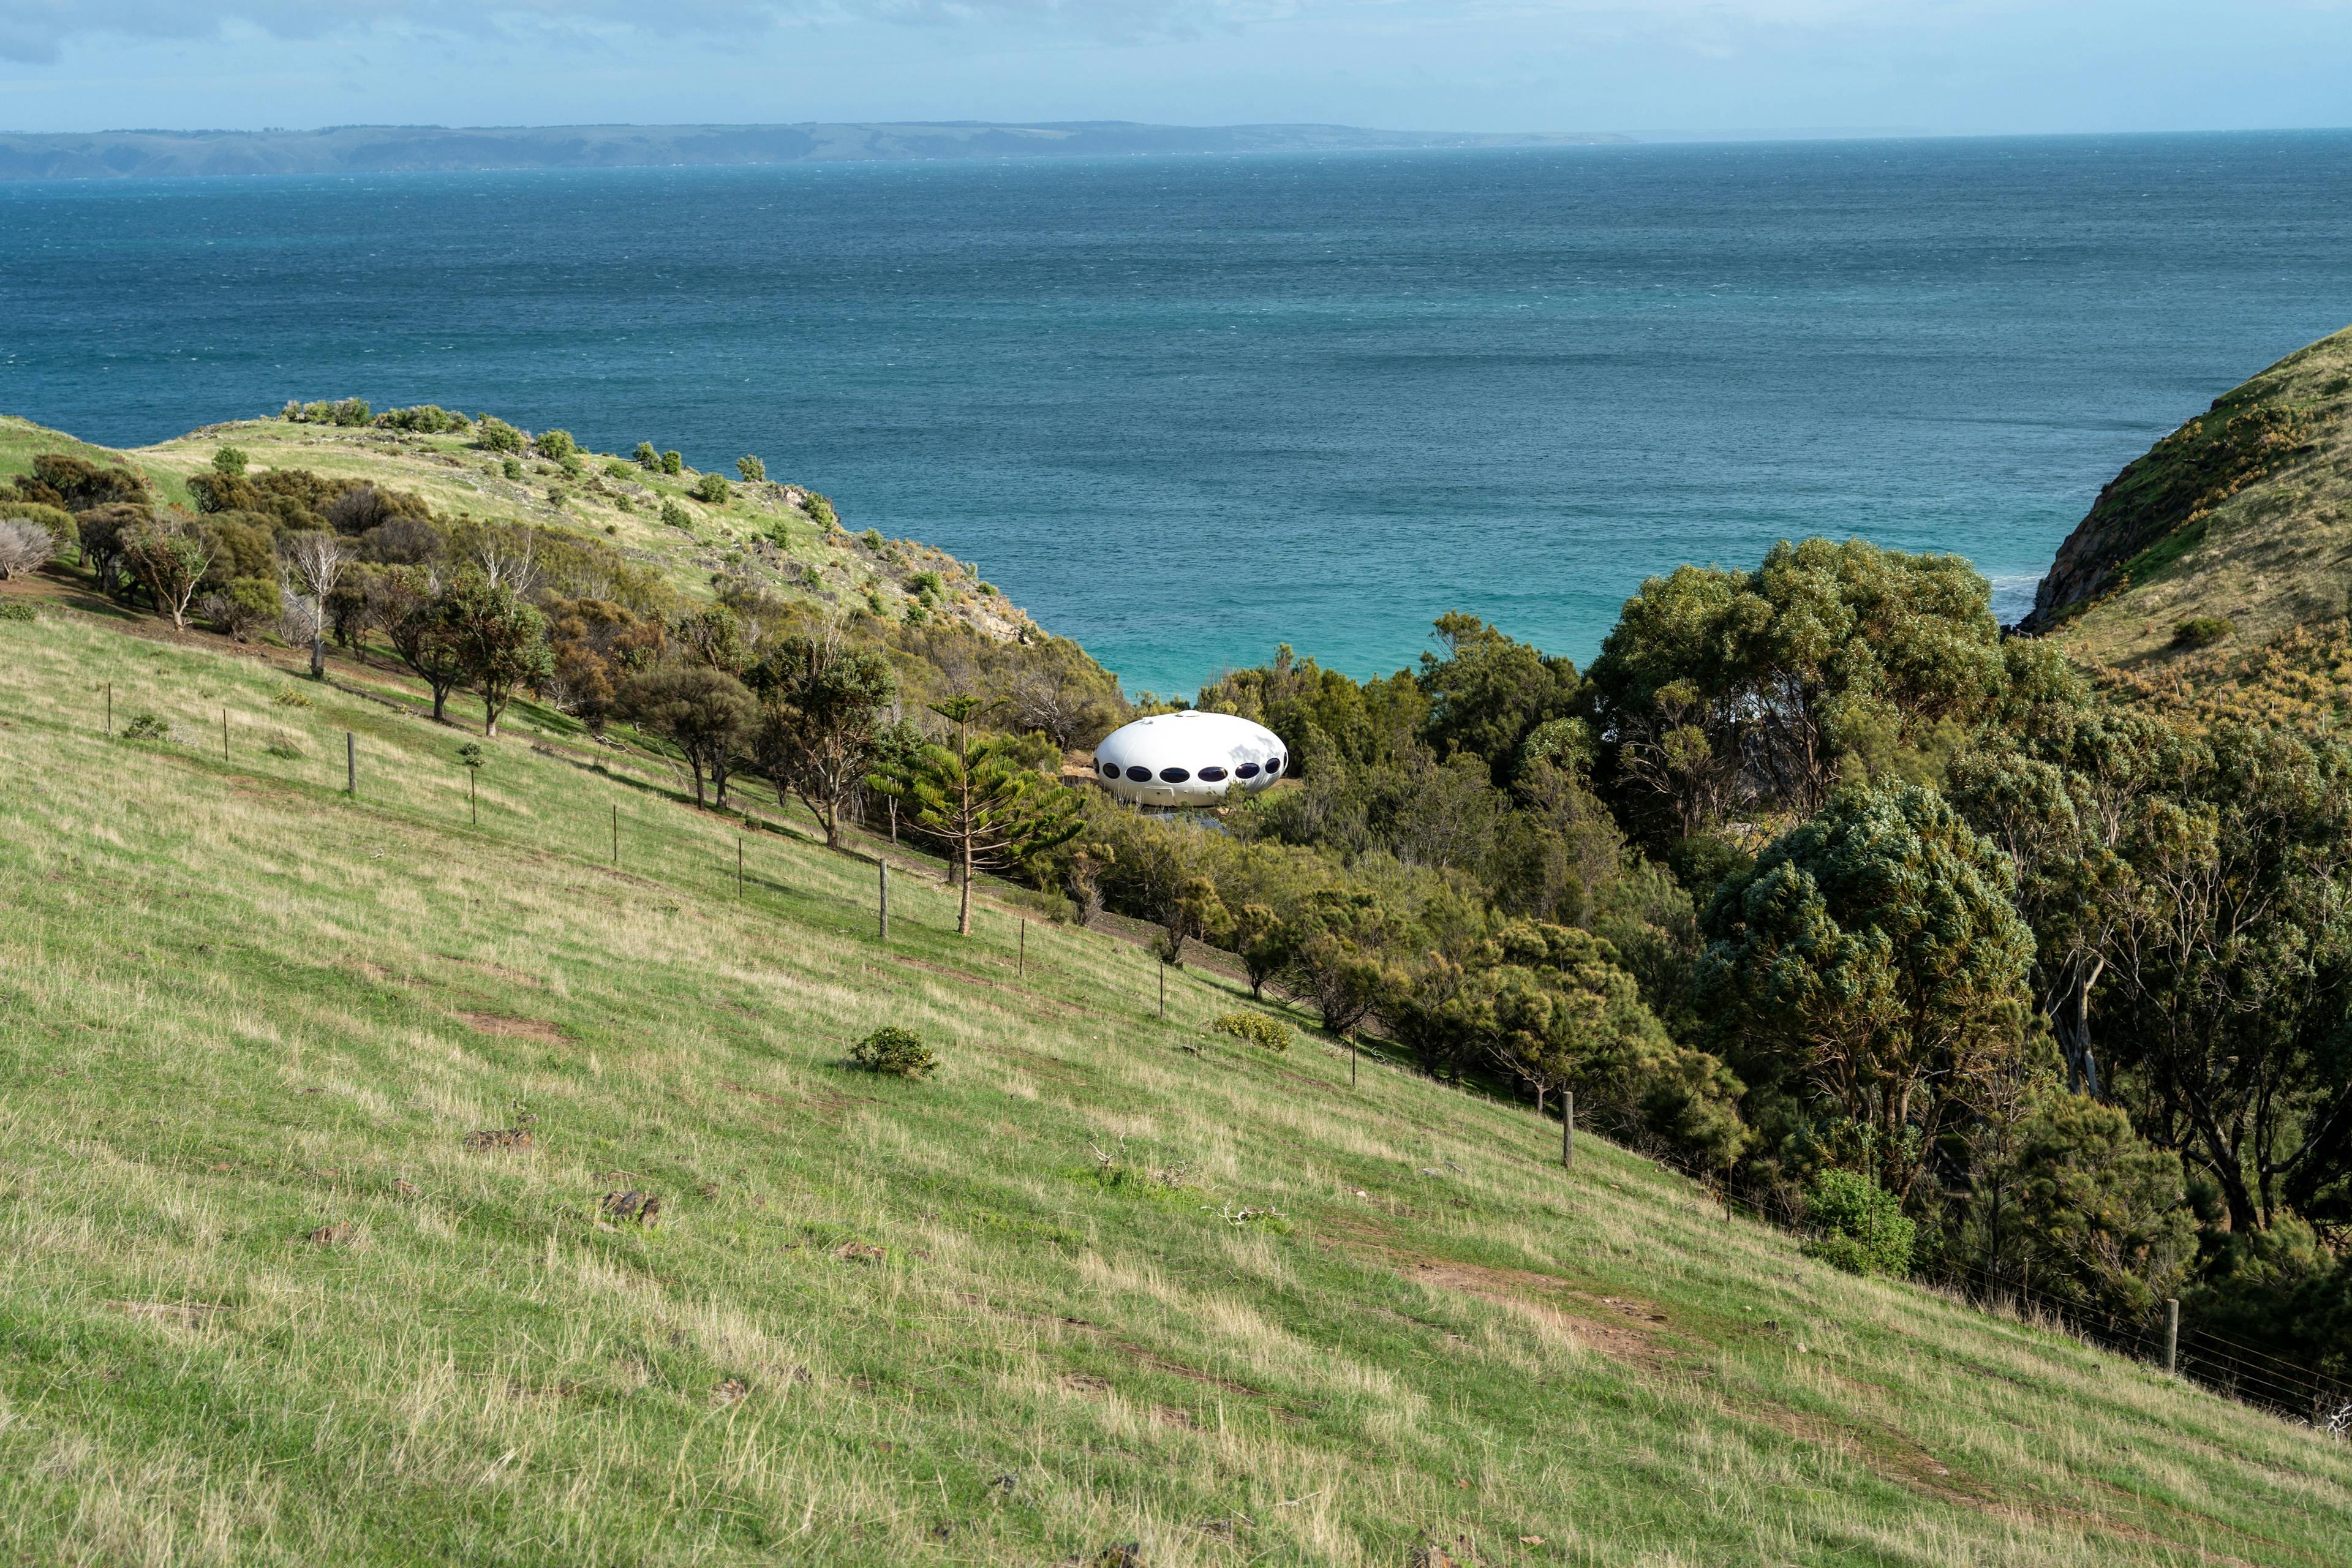 Another view of the quaint UFO house with Kangaroo Island in the background. What a cool spot. 